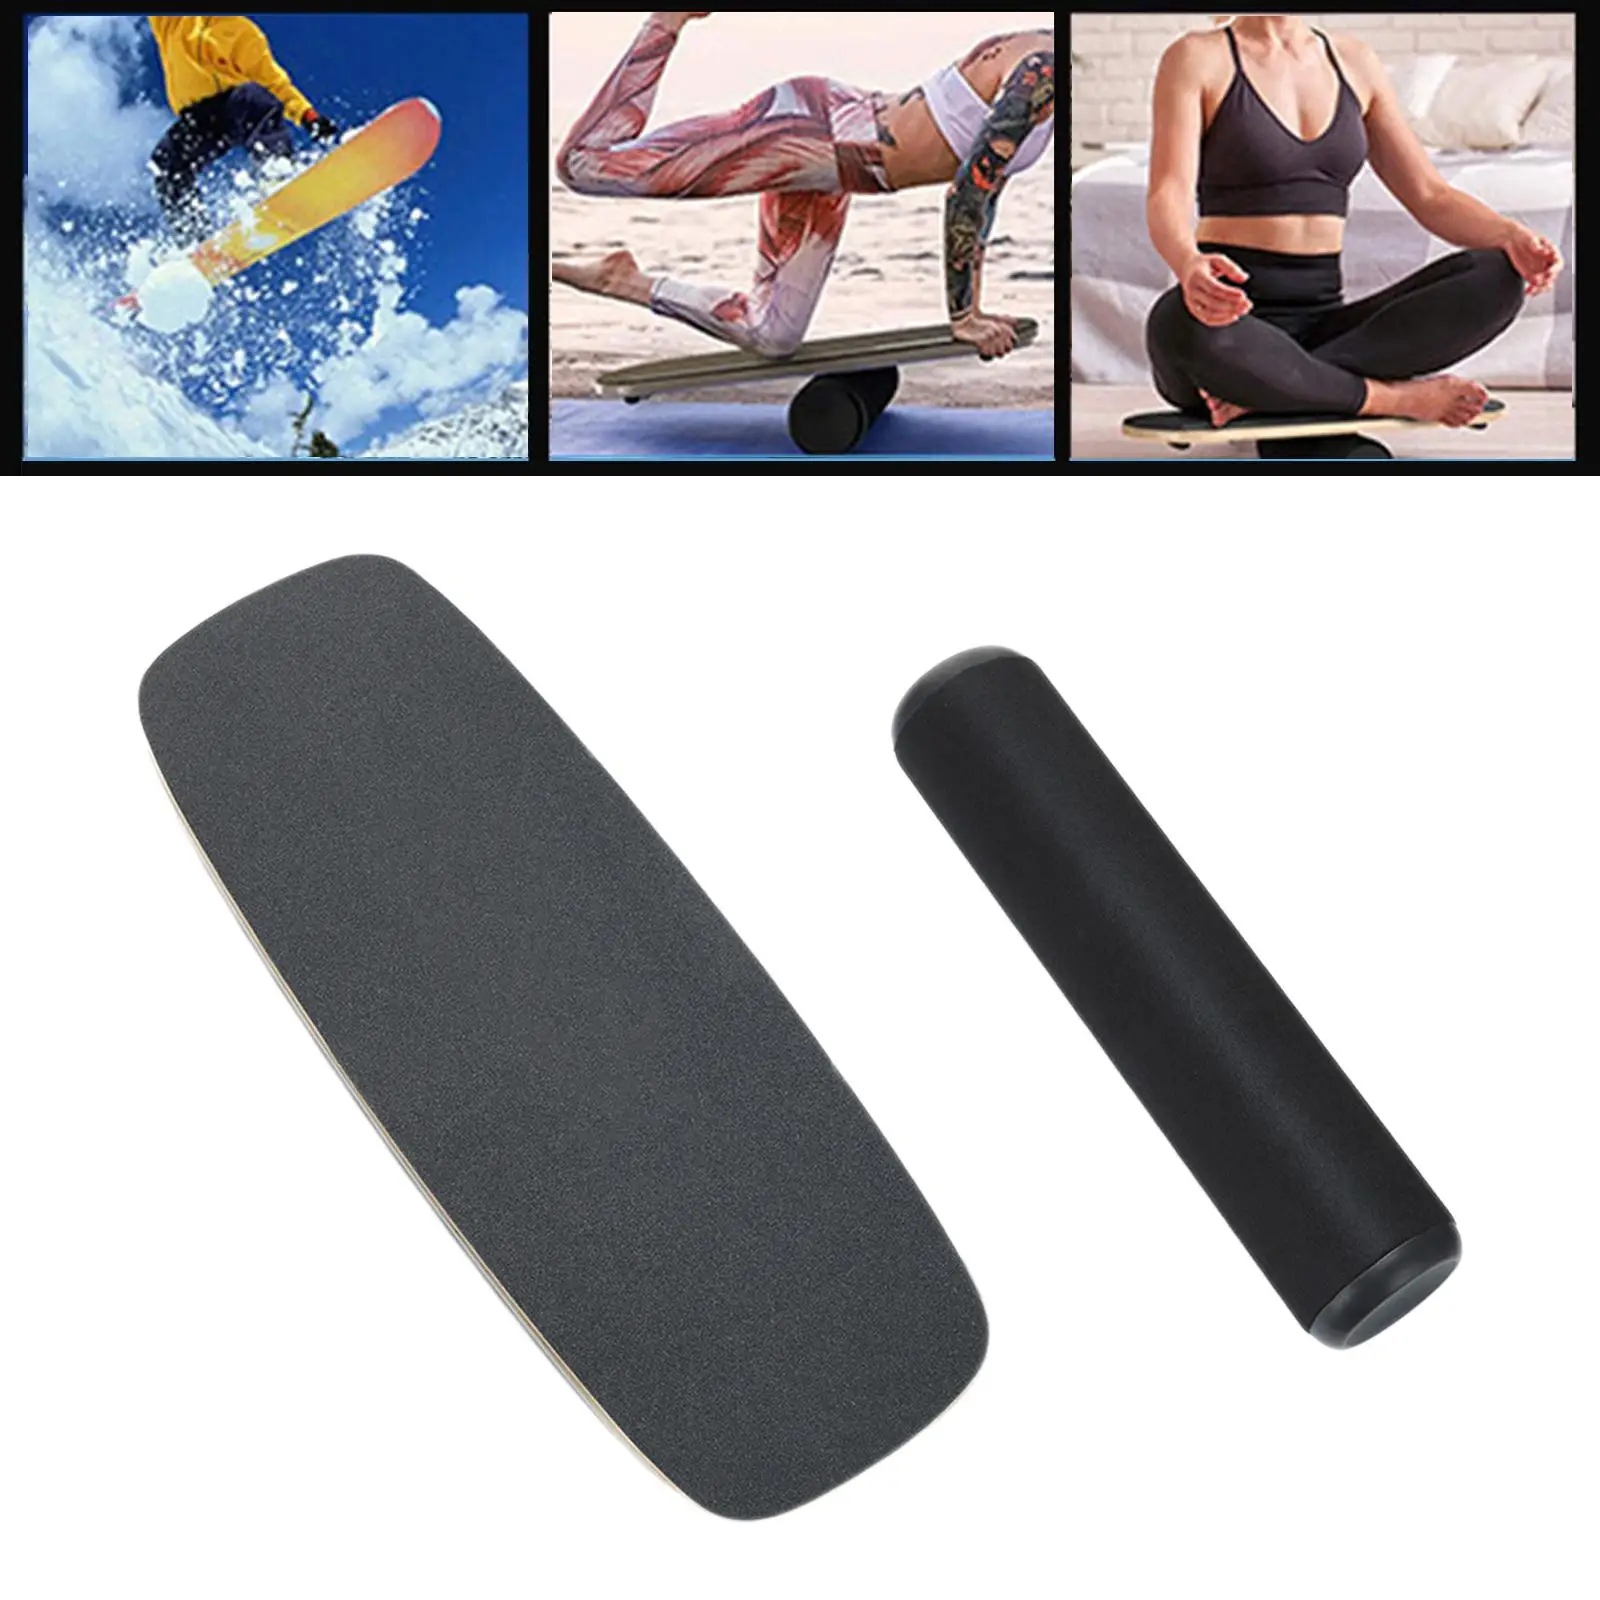 Wooden Balance Board Trainer Fitness Accessories Stability Roller Anti slip